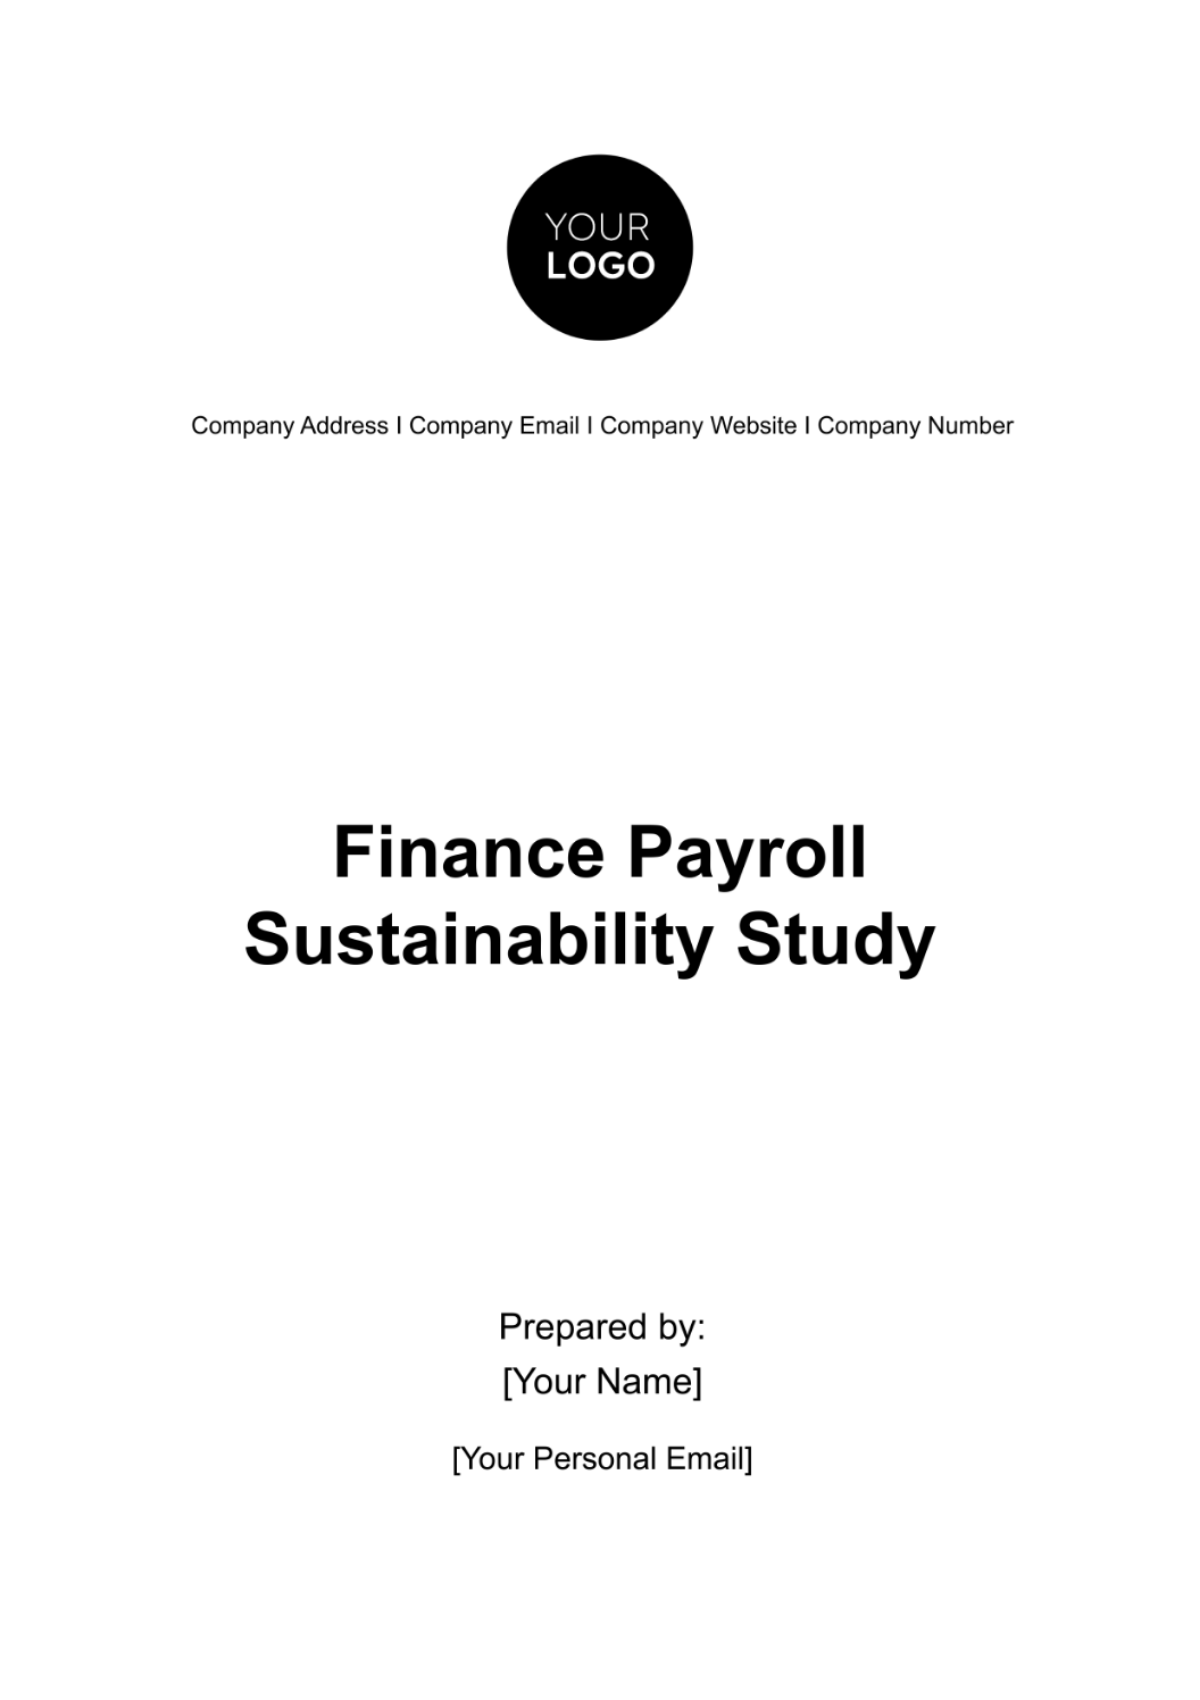 Finance Payroll Sustainability Study Template